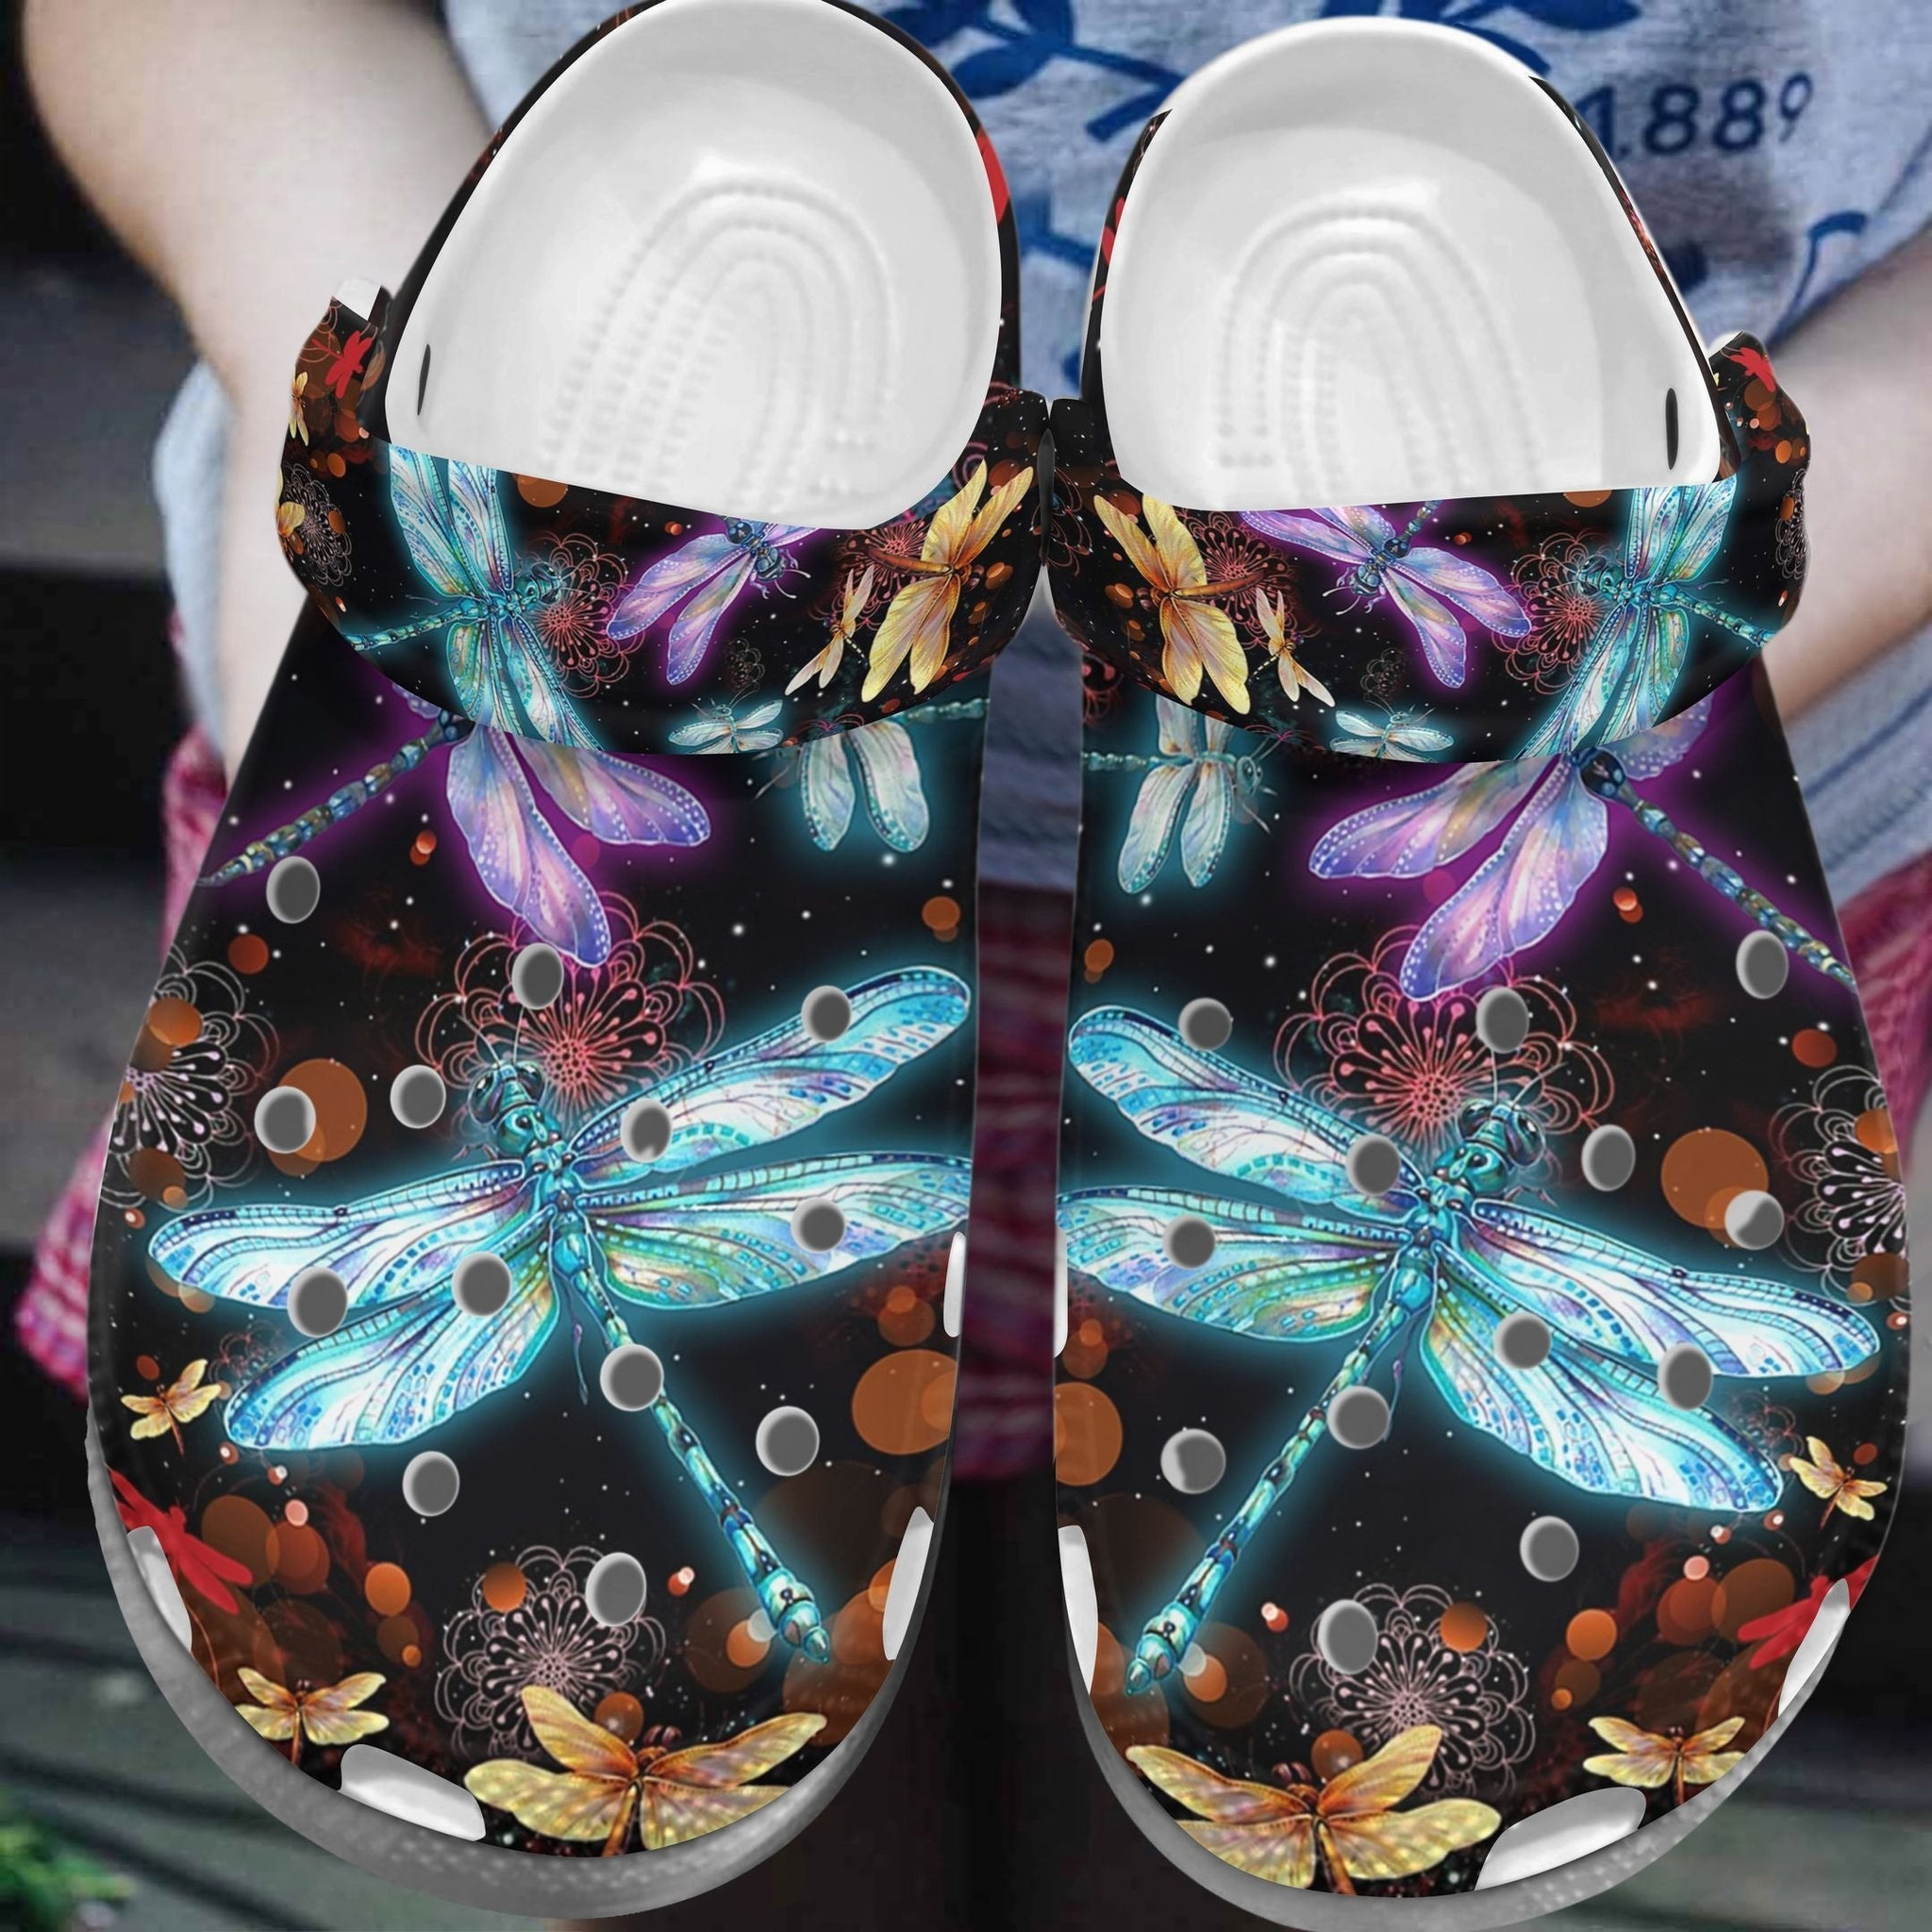 Dragonfly Twinkle Galaxy Crocs Shoes - Dragonfly Boho Croc Clogs Crocs Shoes Gift Women Mother Day